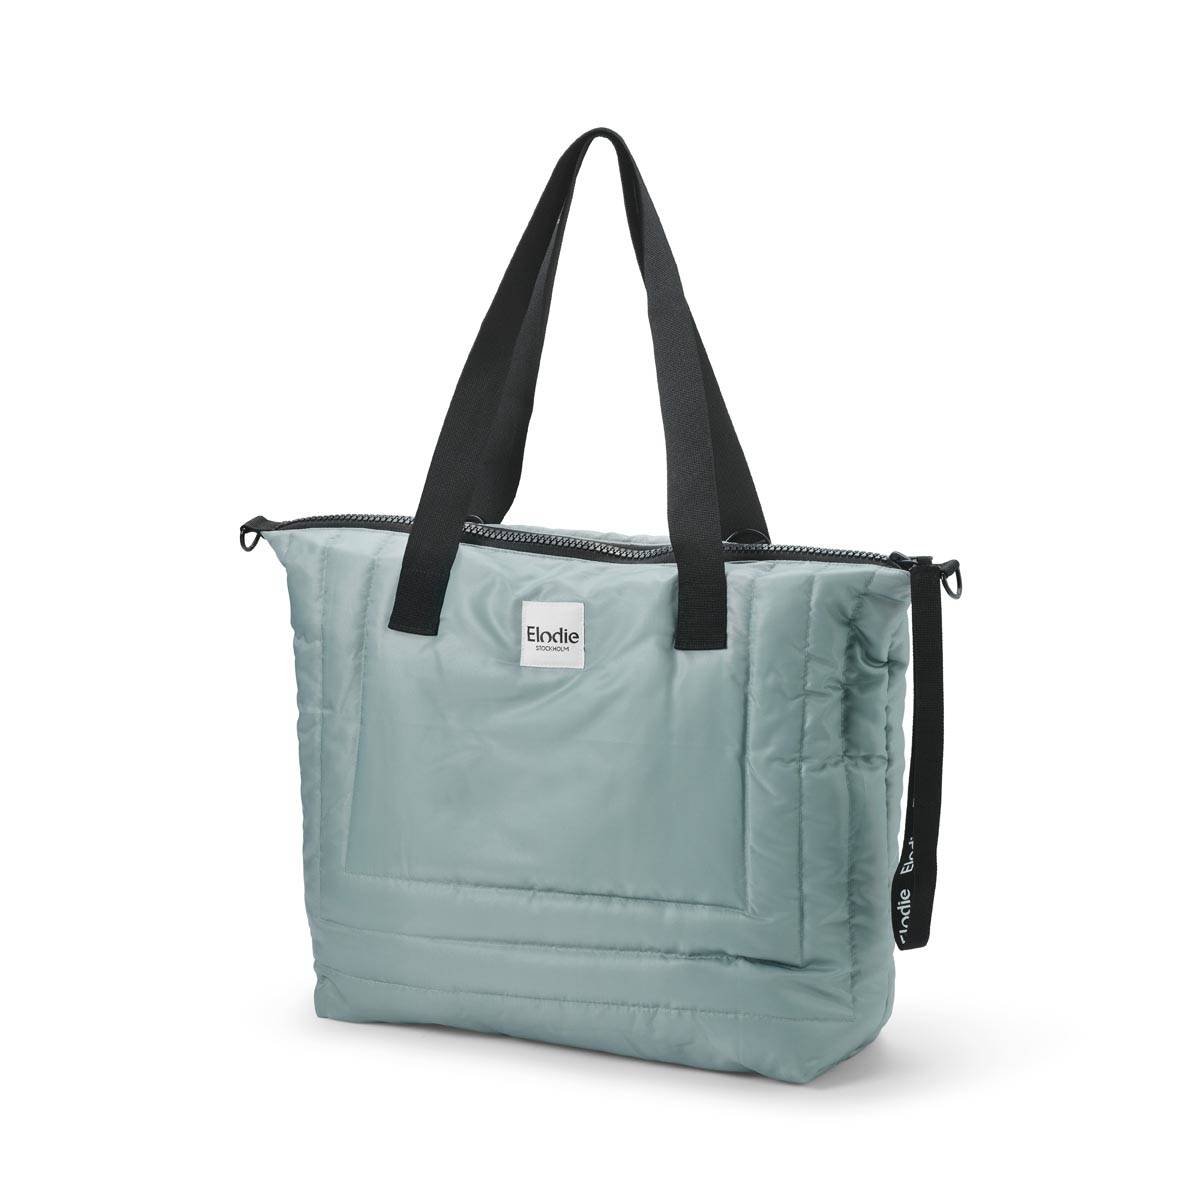 Elodie Details, Pebble Green, Torba dla mamy Quilted